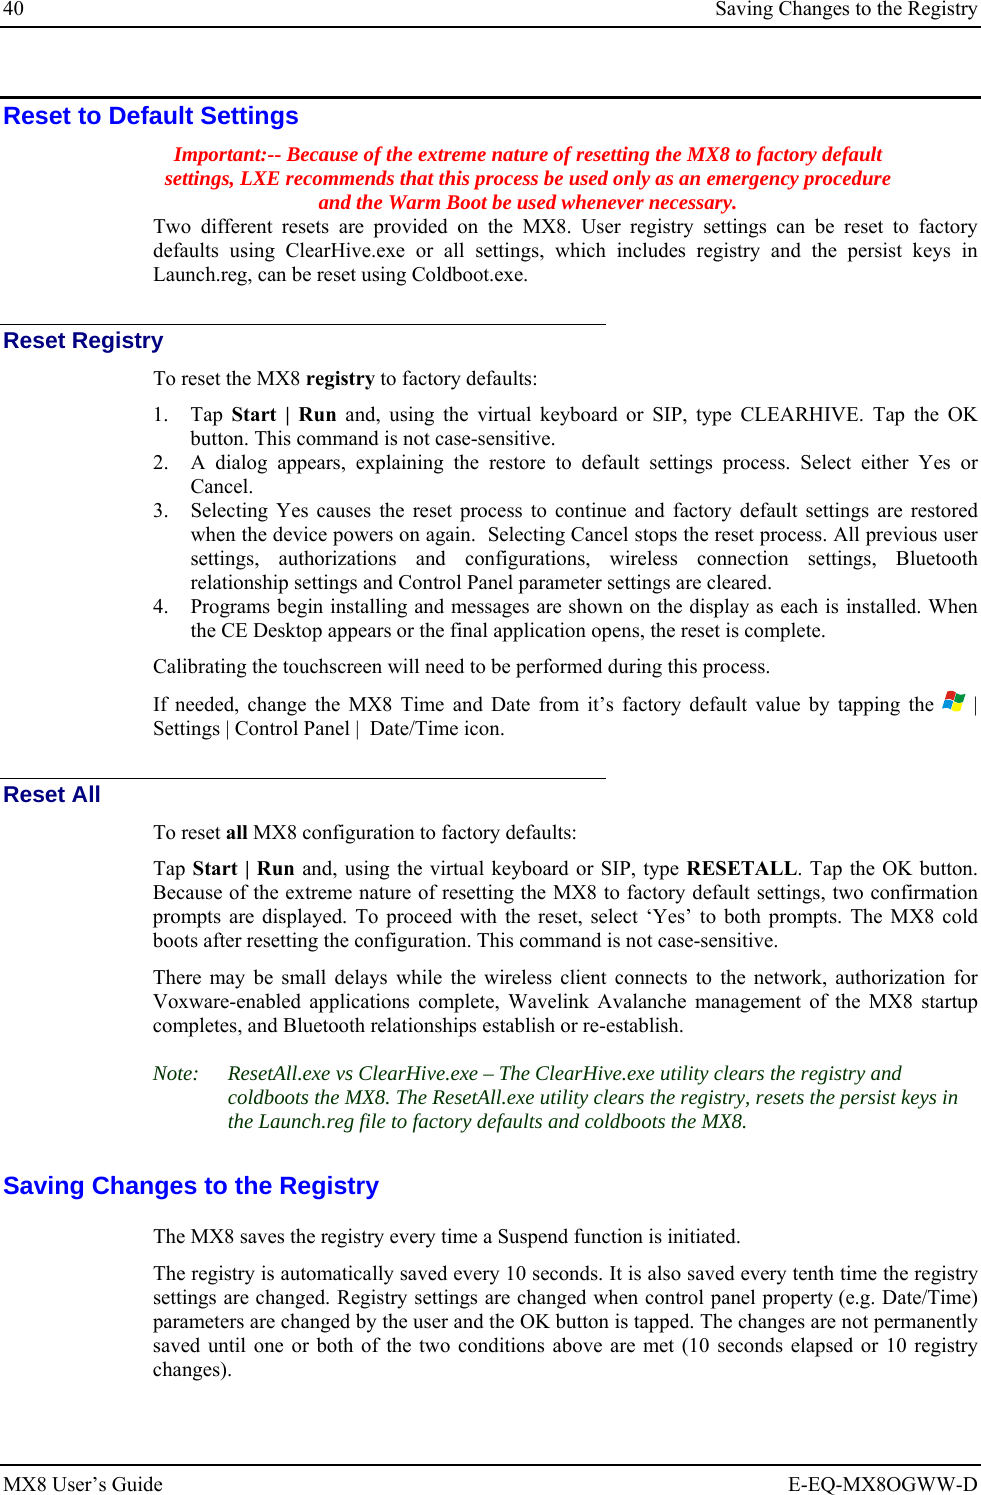 40  Saving Changes to the Registry MX8 User’s Guide  E-EQ-MX8OGWW-D Reset to Default Settings Important:-- Because of the extreme nature of resetting the MX8 to factory default settings, LXE recommends that this process be used only as an emergency procedure and the Warm Boot be used whenever necessary.  Two different resets are provided on the MX8. User registry settings can be reset to factory defaults using ClearHive.exe or all settings, which includes registry and the persist keys in Launch.reg, can be reset using Coldboot.exe. Reset Registry To reset the MX8 registry to factory defaults: 1. Tap  Start | Run and, using the virtual keyboard or SIP, type CLEARHIVE. Tap the OK button. This command is not case-sensitive. 2. A dialog appears, explaining the restore to default settings process. Select either Yes or Cancel. 3. Selecting Yes causes the reset process to continue and factory default settings are restored when the device powers on again.  Selecting Cancel stops the reset process. All previous user settings, authorizations and configurations, wireless connection settings, Bluetooth relationship settings and Control Panel parameter settings are cleared.  4. Programs begin installing and messages are shown on the display as each is installed. When the CE Desktop appears or the final application opens, the reset is complete. Calibrating the touchscreen will need to be performed during this process.  If needed, change the MX8 Time and Date from it’s factory default value by tapping the   | Settings | Control Panel |  Date/Time icon. Reset All To reset all MX8 configuration to factory defaults: Tap Start | Run and, using the virtual keyboard or SIP, type RESETALL. Tap the OK button. Because of the extreme nature of resetting the MX8 to factory default settings, two confirmation prompts are displayed. To proceed with the reset, select ‘Yes’ to both prompts. The MX8 cold boots after resetting the configuration. This command is not case-sensitive. There may be small delays while the wireless client connects to the network, authorization for Voxware-enabled applications complete, Wavelink Avalanche management of the MX8 startup completes, and Bluetooth relationships establish or re-establish. Note:   ResetAll.exe vs ClearHive.exe – The ClearHive.exe utility clears the registry and coldboots the MX8. The ResetAll.exe utility clears the registry, resets the persist keys in the Launch.reg file to factory defaults and coldboots the MX8. Saving Changes to the Registry The MX8 saves the registry every time a Suspend function is initiated.  The registry is automatically saved every 10 seconds. It is also saved every tenth time the registry settings are changed. Registry settings are changed when control panel property (e.g. Date/Time) parameters are changed by the user and the OK button is tapped. The changes are not permanently saved until one or both of the two conditions above are met (10 seconds elapsed or 10 registry changes).  